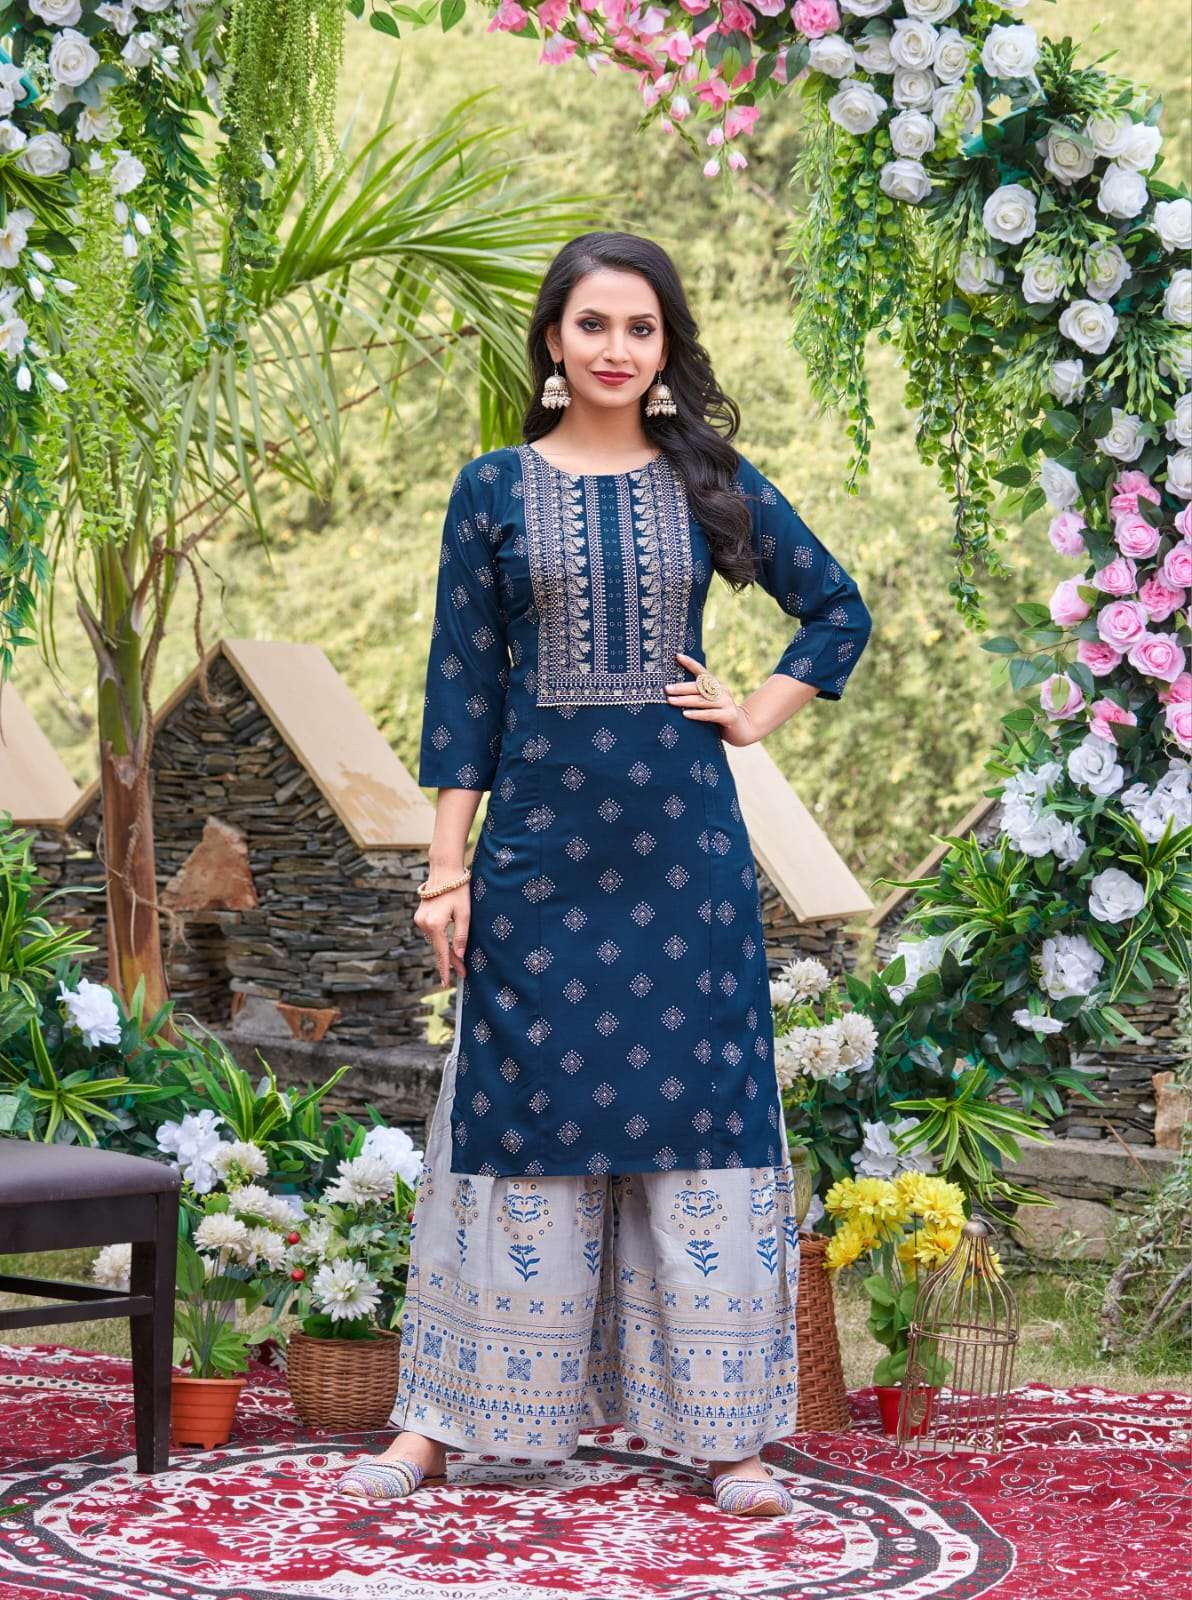 tips and tops olio vol-2 exclusive designer kurti with gharara set latest catalogue collection 2023